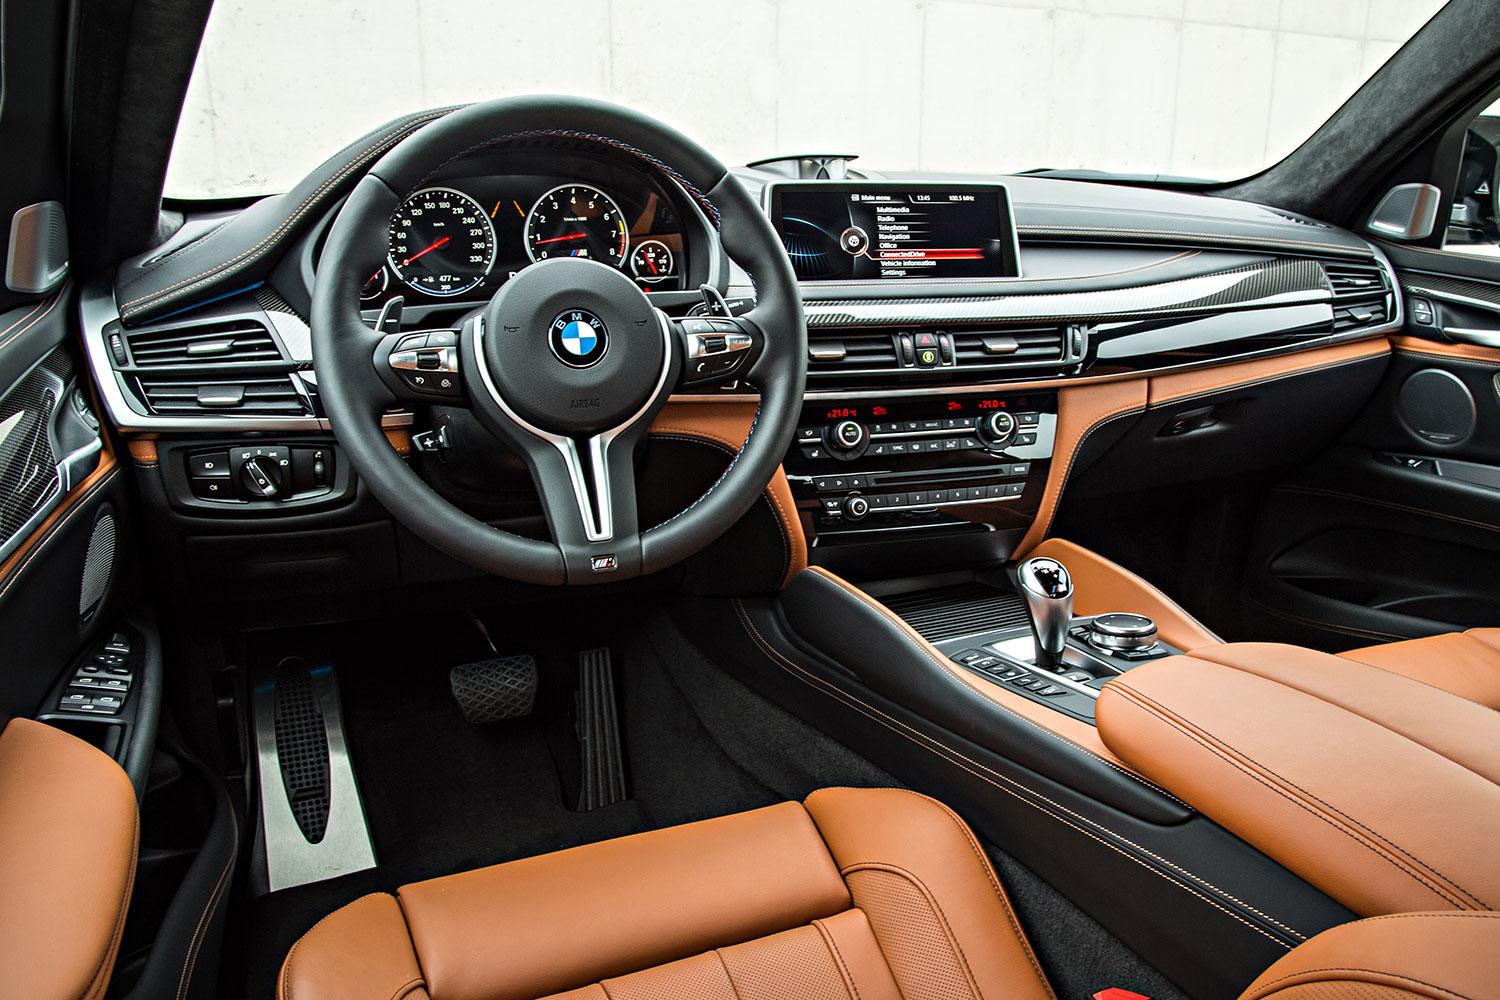 2015 BMW X6 M First Drive Review | Digital Trends